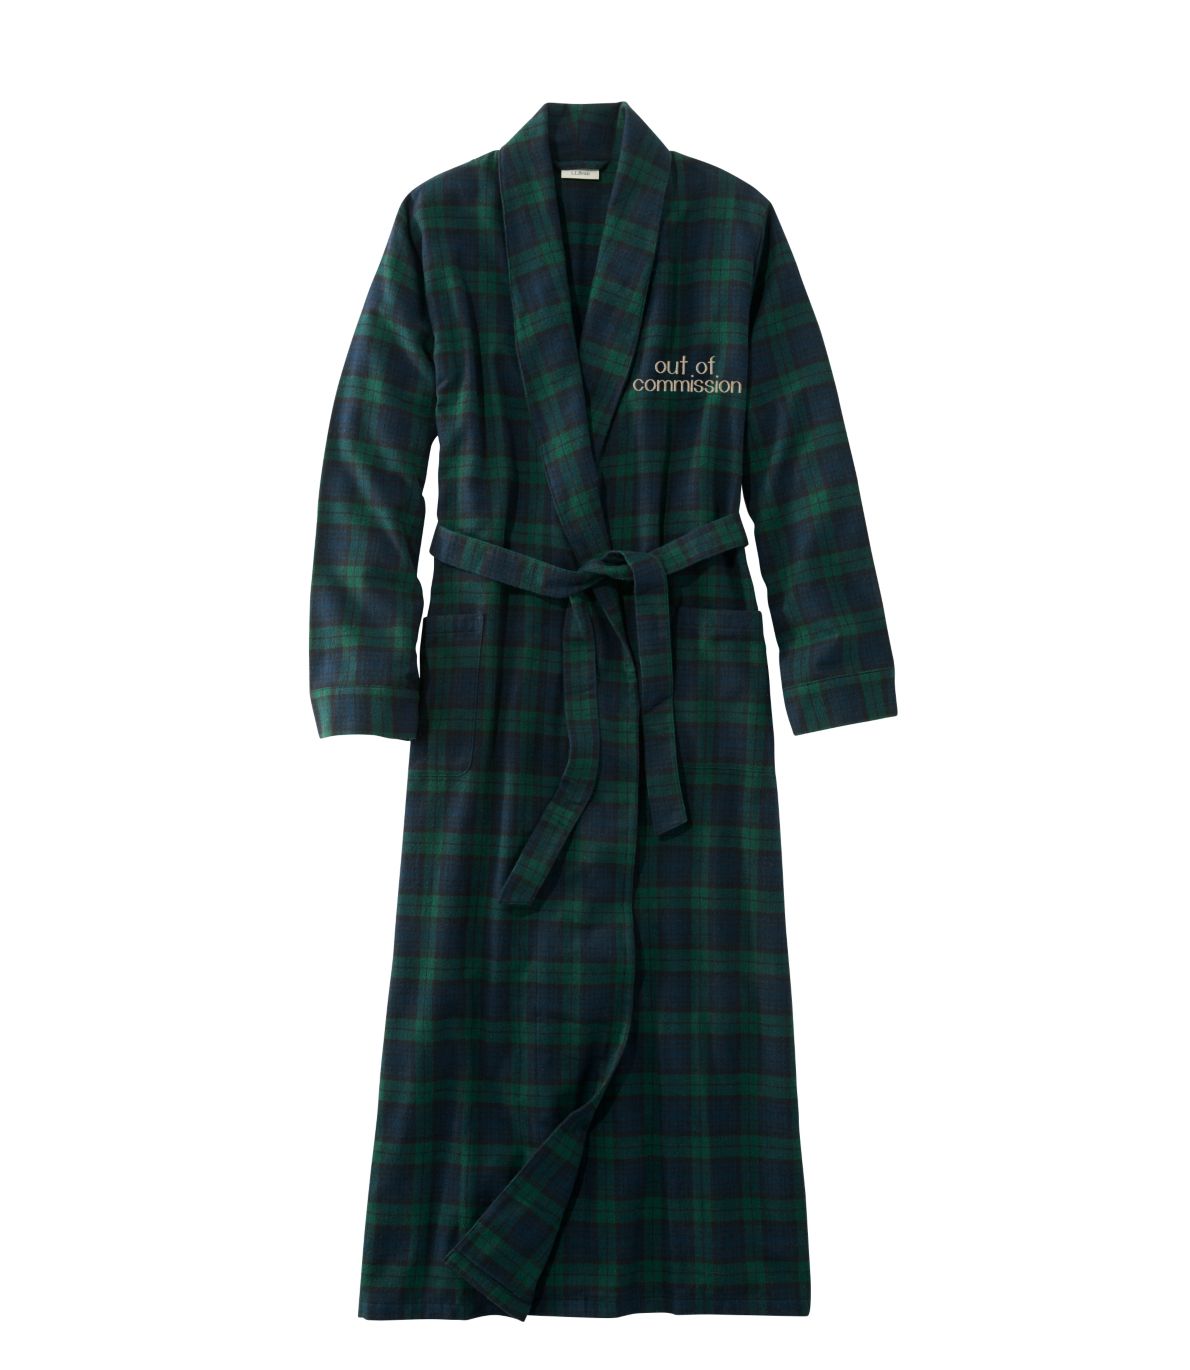 Embroidered Women's Scotch Plaid Flannel Robe